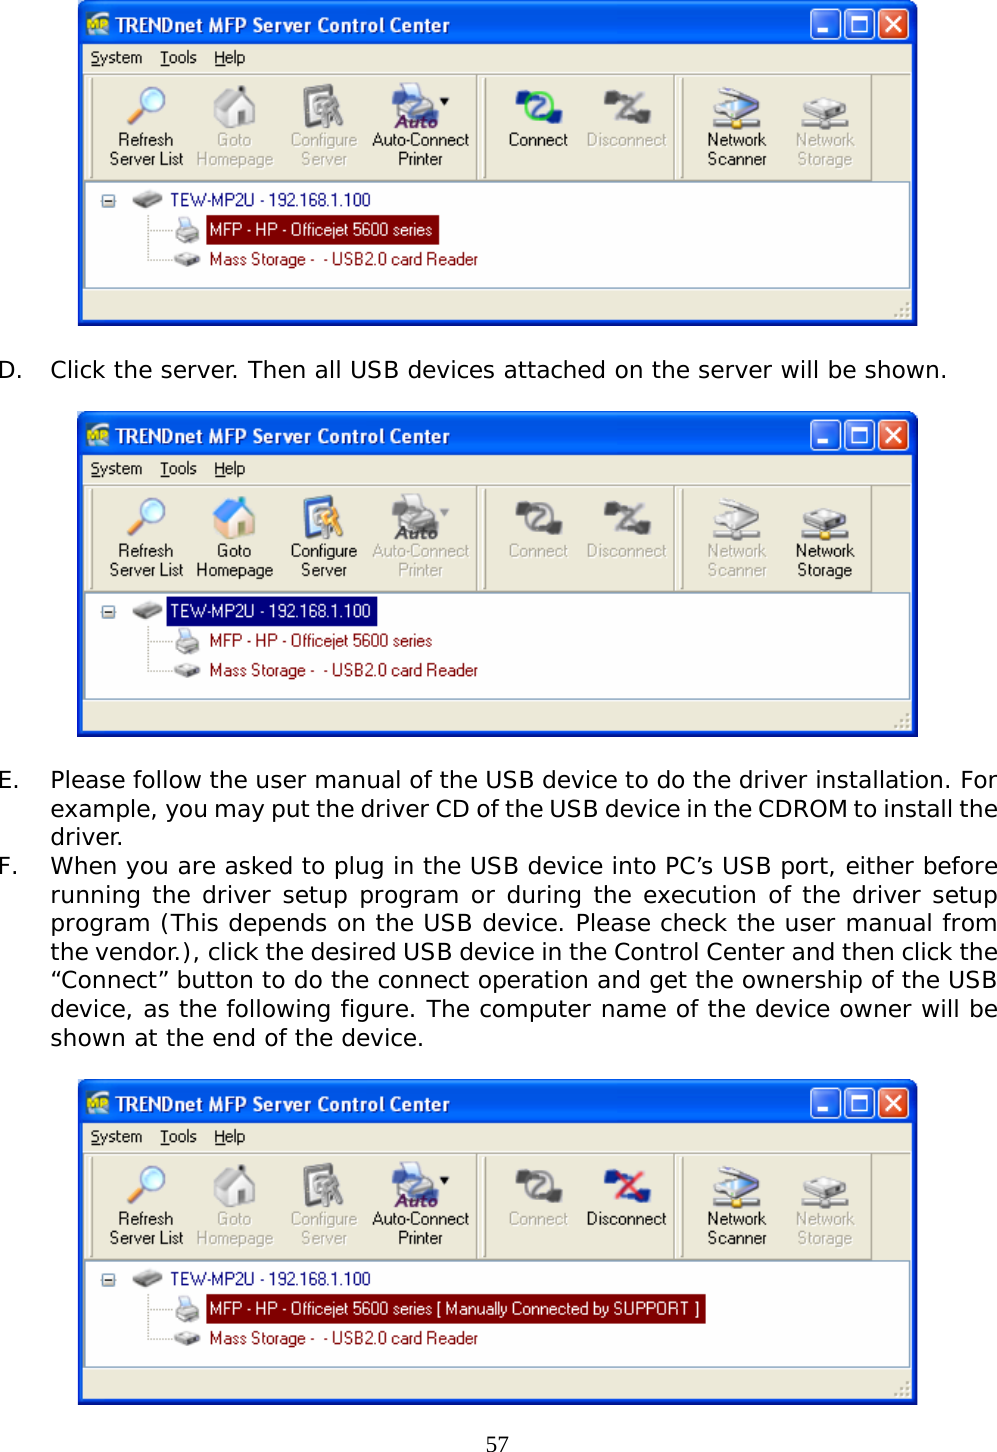     57  D. Click the server. Then all USB devices attached on the server will be shown.    E. Please follow the user manual of the USB device to do the driver installation. For example, you may put the driver CD of the USB device in the CDROM to install the driver. F. When you are asked to plug in the USB device into PC’s USB port, either before running the driver setup program or during the execution of the driver setup program (This depends on the USB device. Please check the user manual from the vendor.), click the desired USB device in the Control Center and then click the “Connect” button to do the connect operation and get the ownership of the USB device, as the following figure. The computer name of the device owner will be shown at the end of the device.   